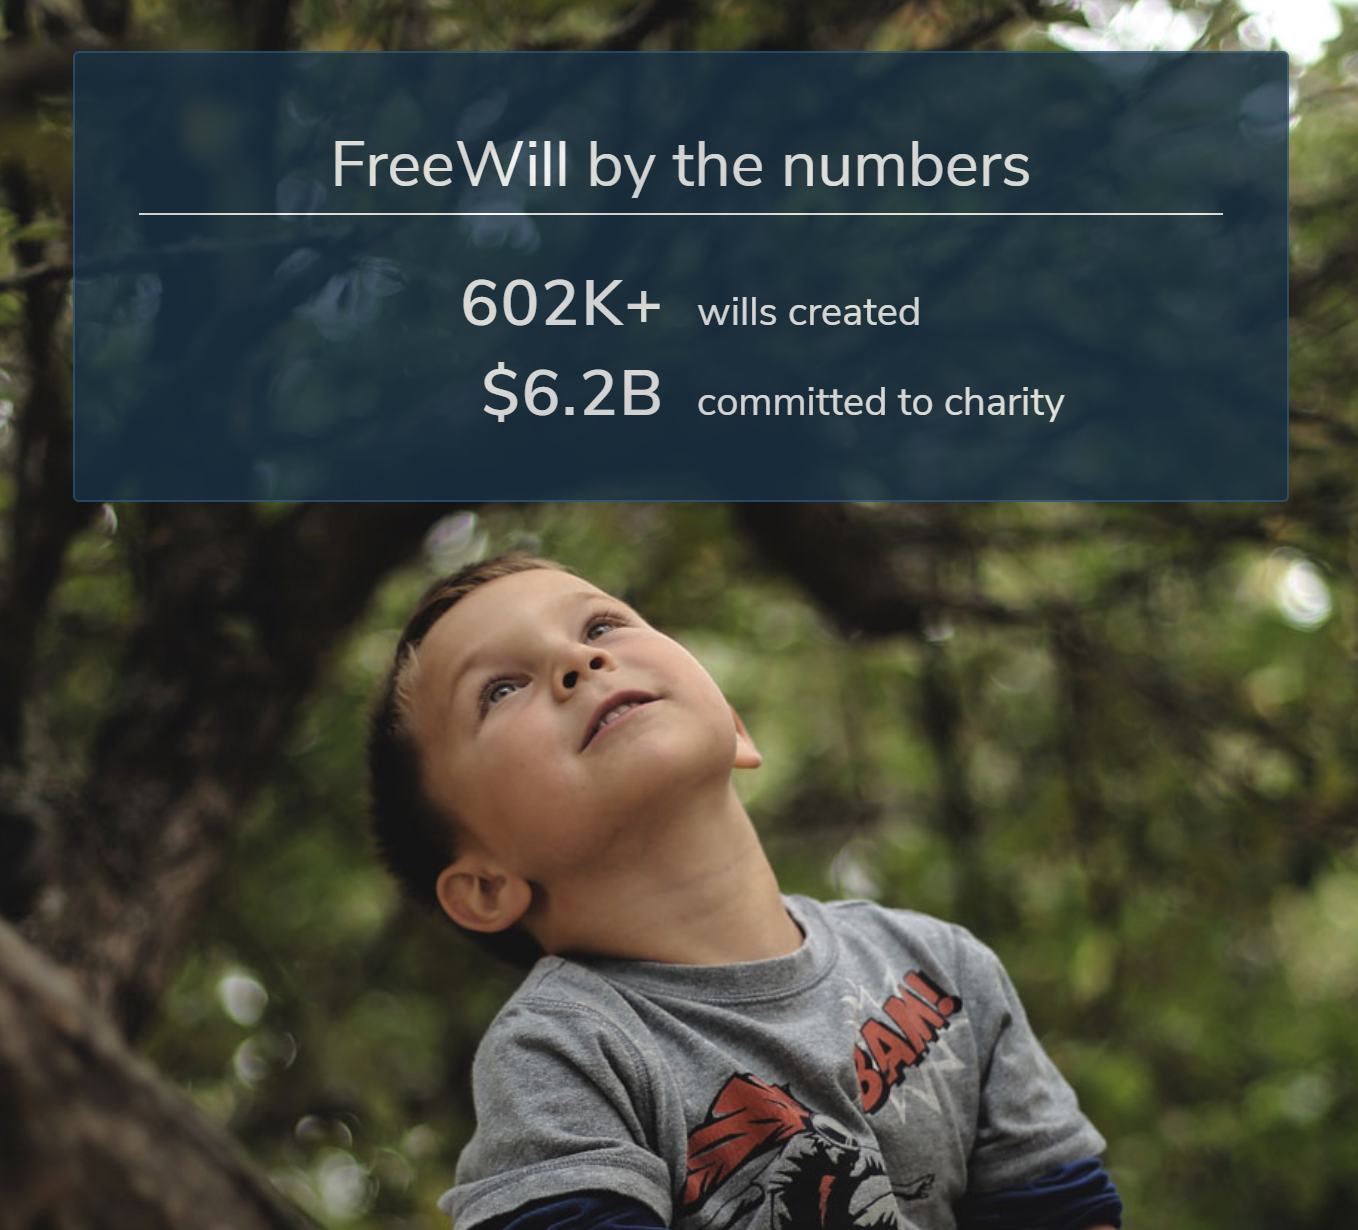 Blue Box with text "Free Will by the numbers, 602K+ will created, $6.2B Committed to charity" Sits above a boy looking into the sky under a tree. 